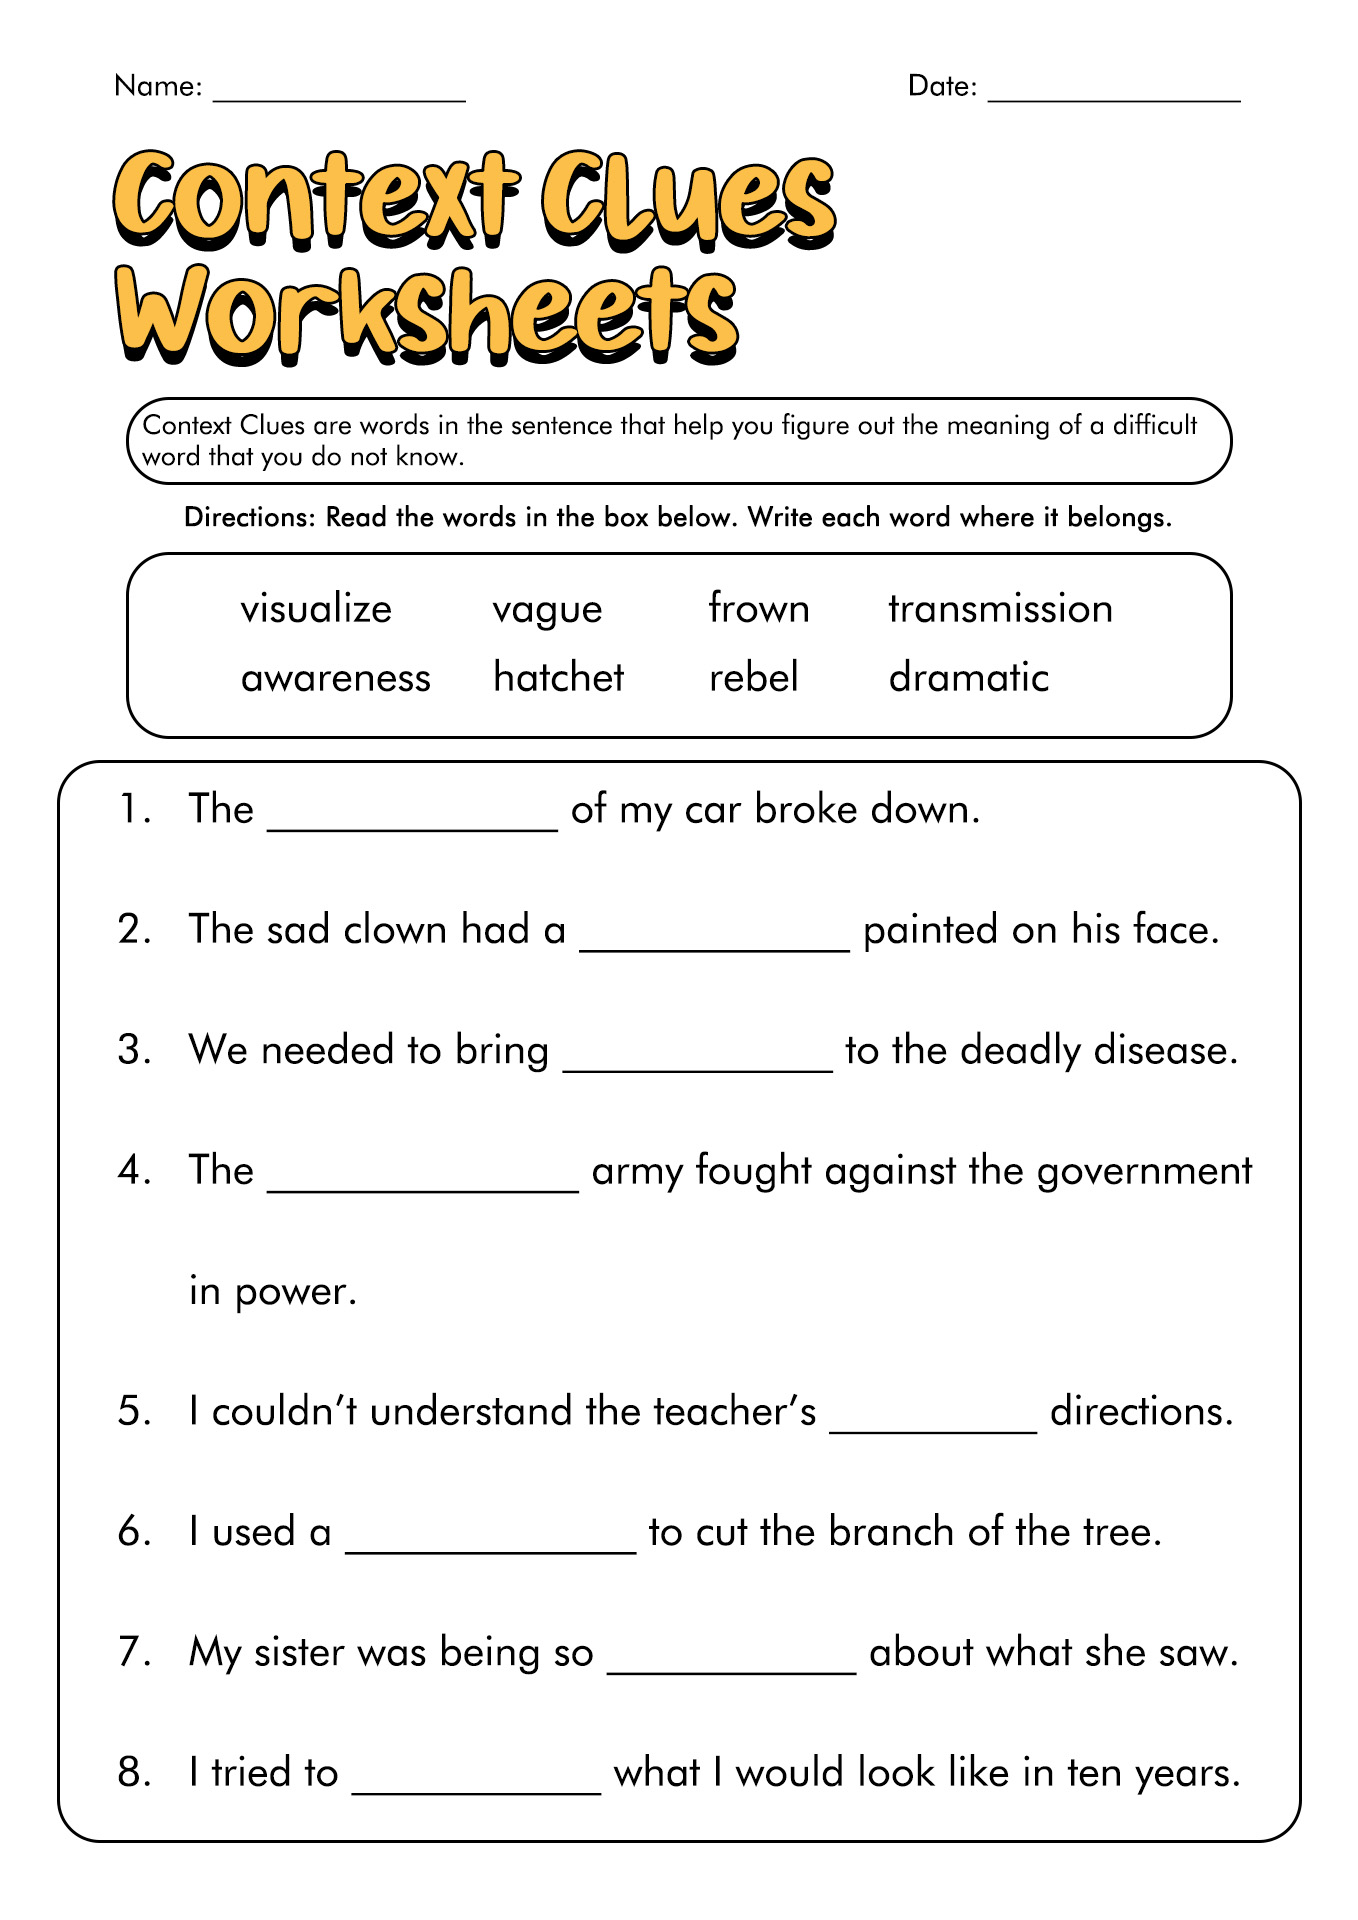 Context Clues Worksheets Image